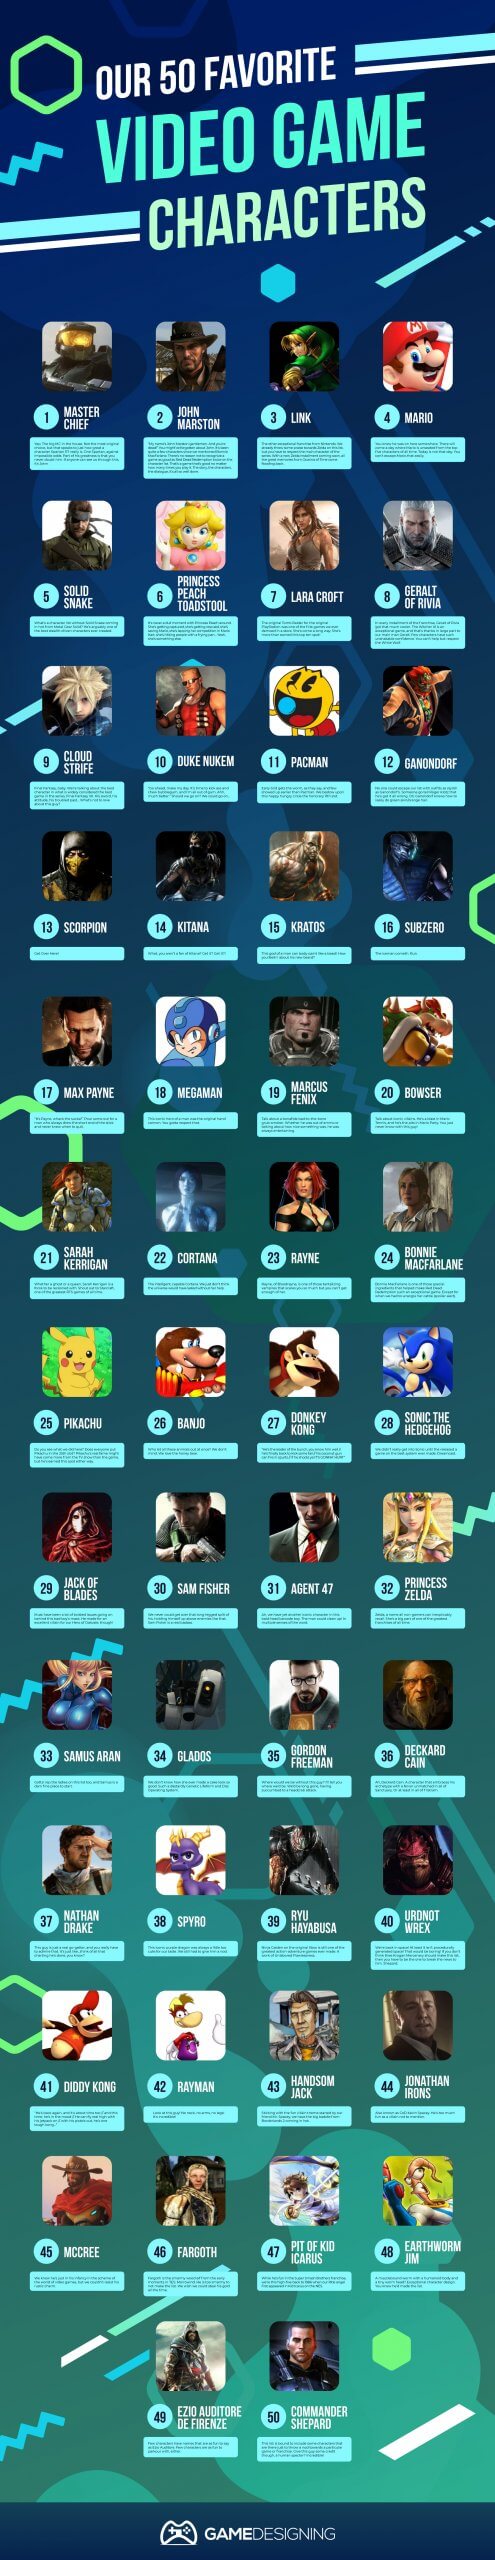 top 50 video games of all time